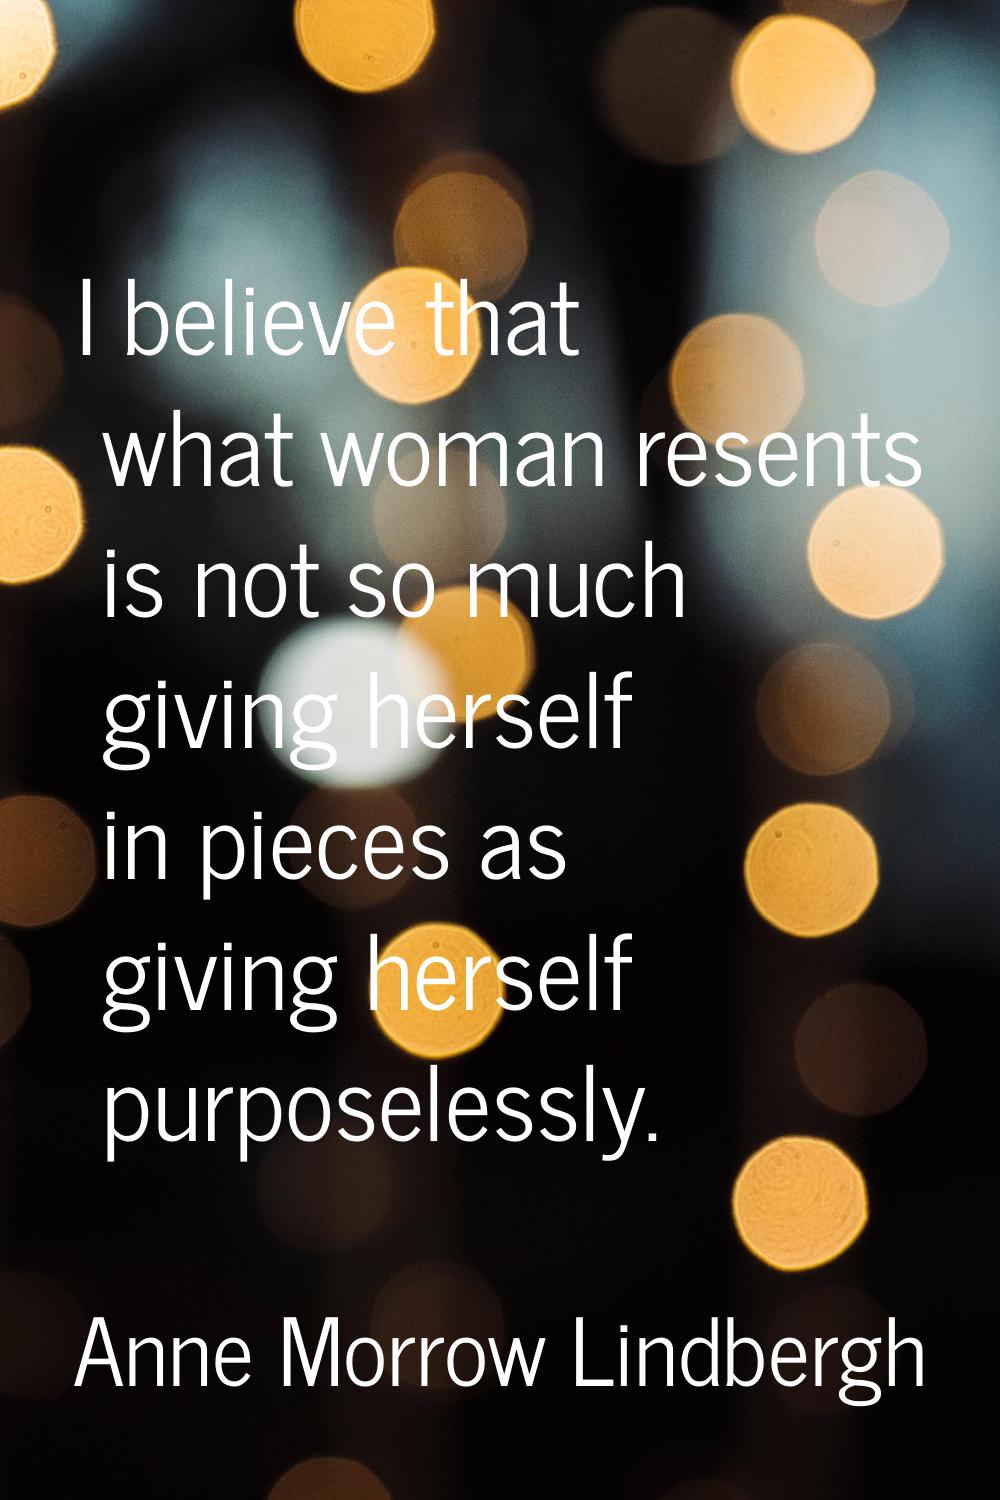 I believe that what woman resents is not so much giving herself in pieces as giving herself purpose